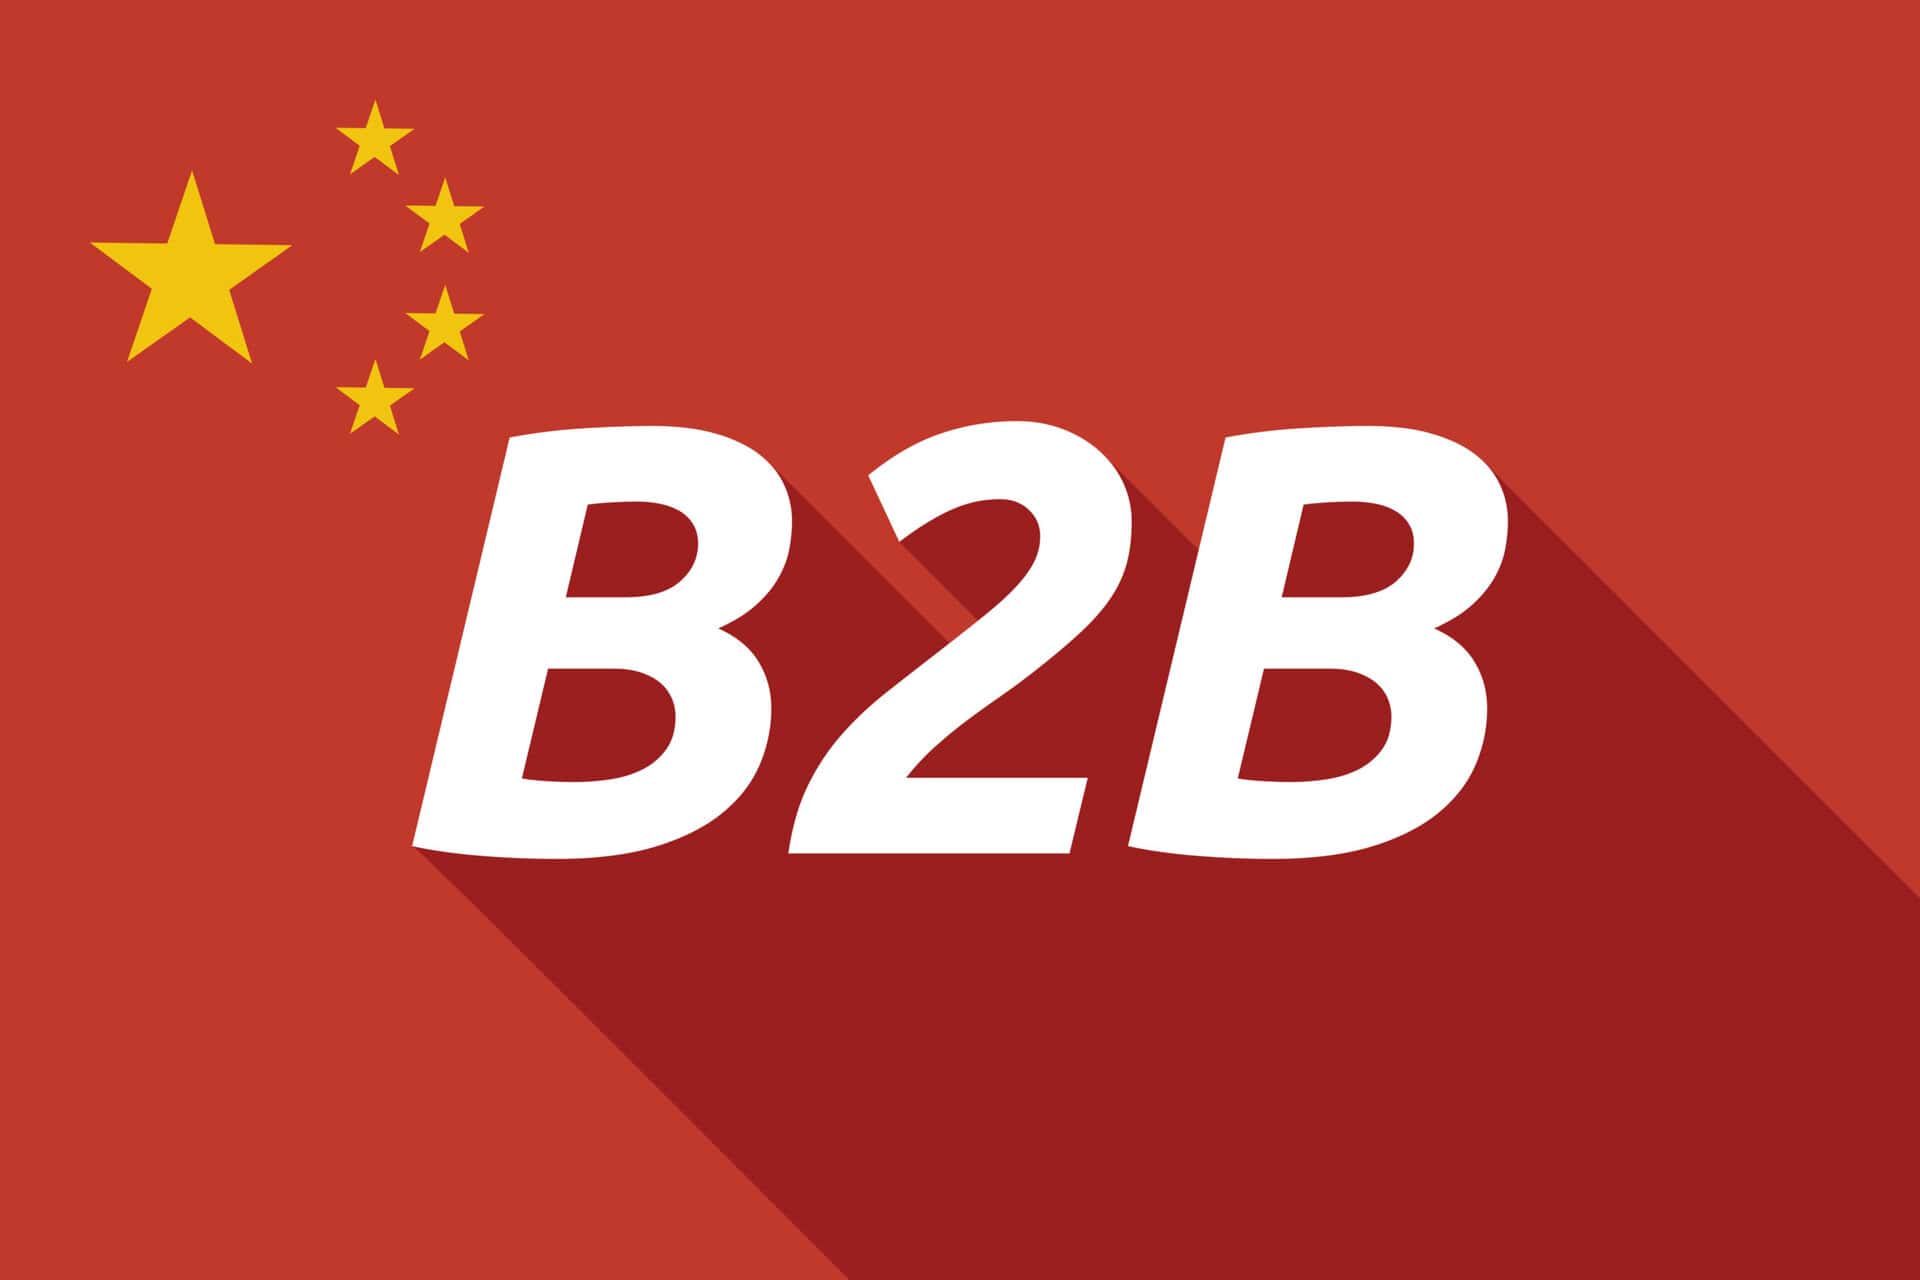 NBH Guide: B2B Marketing Strategy for China